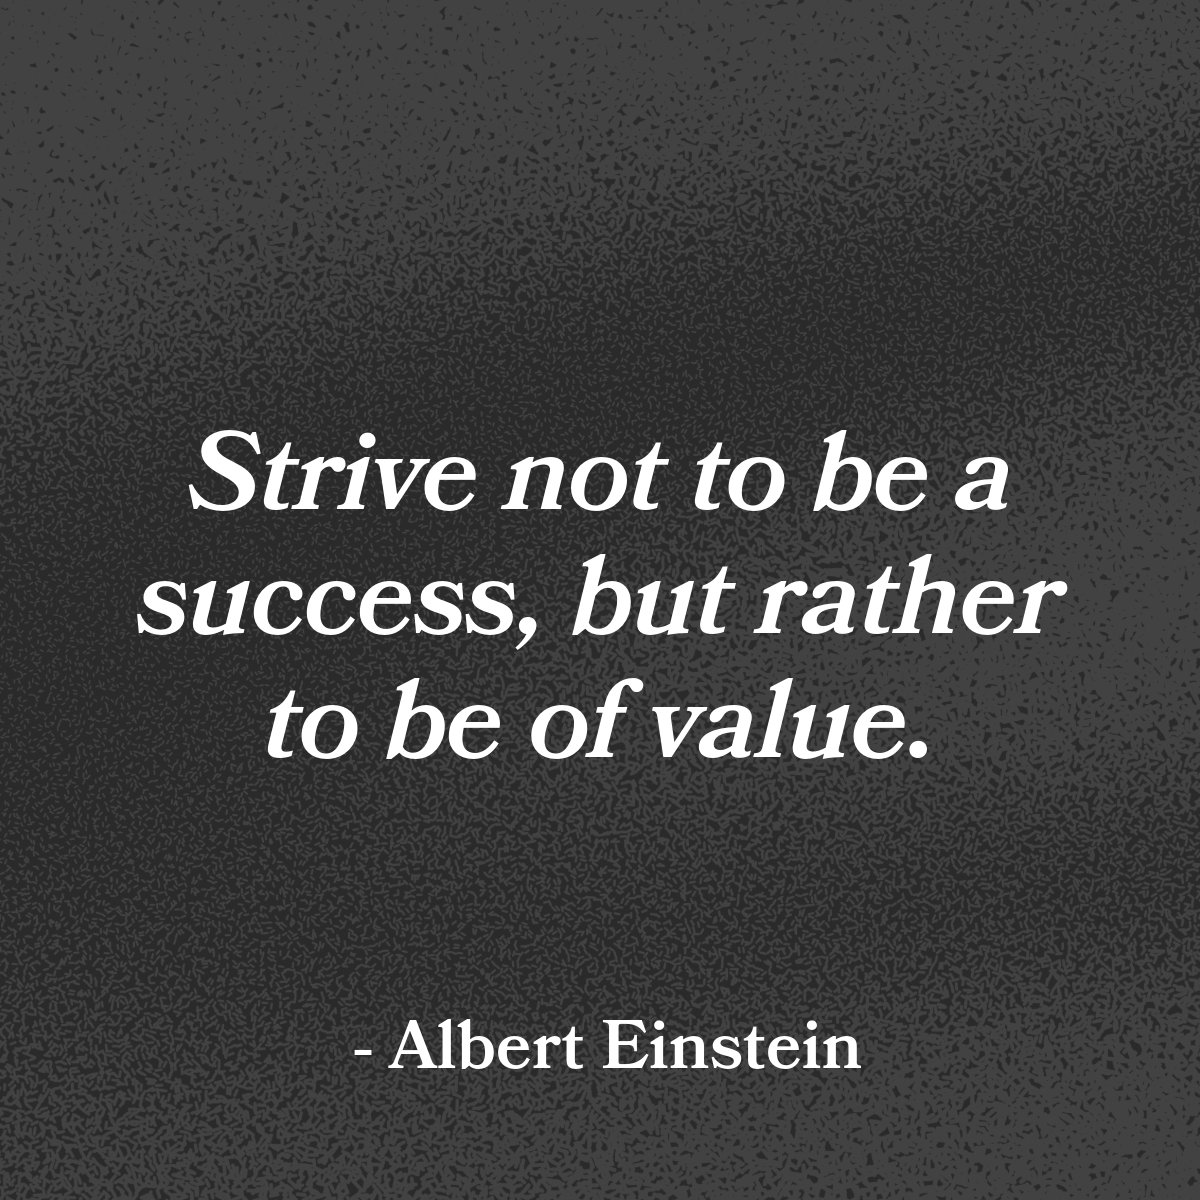 Aim to be valuable, not just successful. True worth comes from making a difference.

#motivational #SuccessTips #alberteinstein